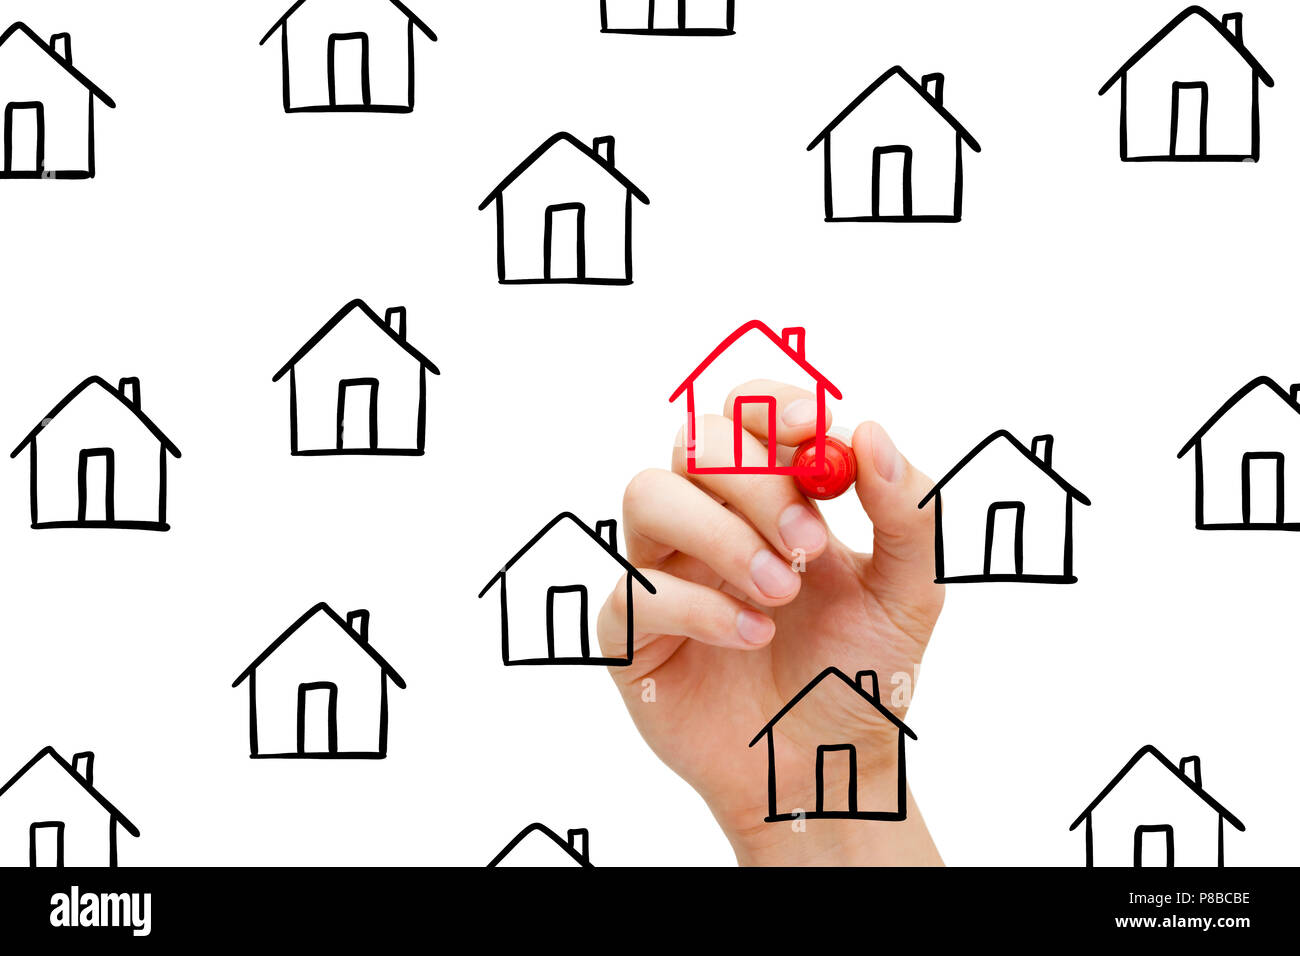 Hand drawing finding new house to buy concept with marker on transparent wipe board. Stock Photo